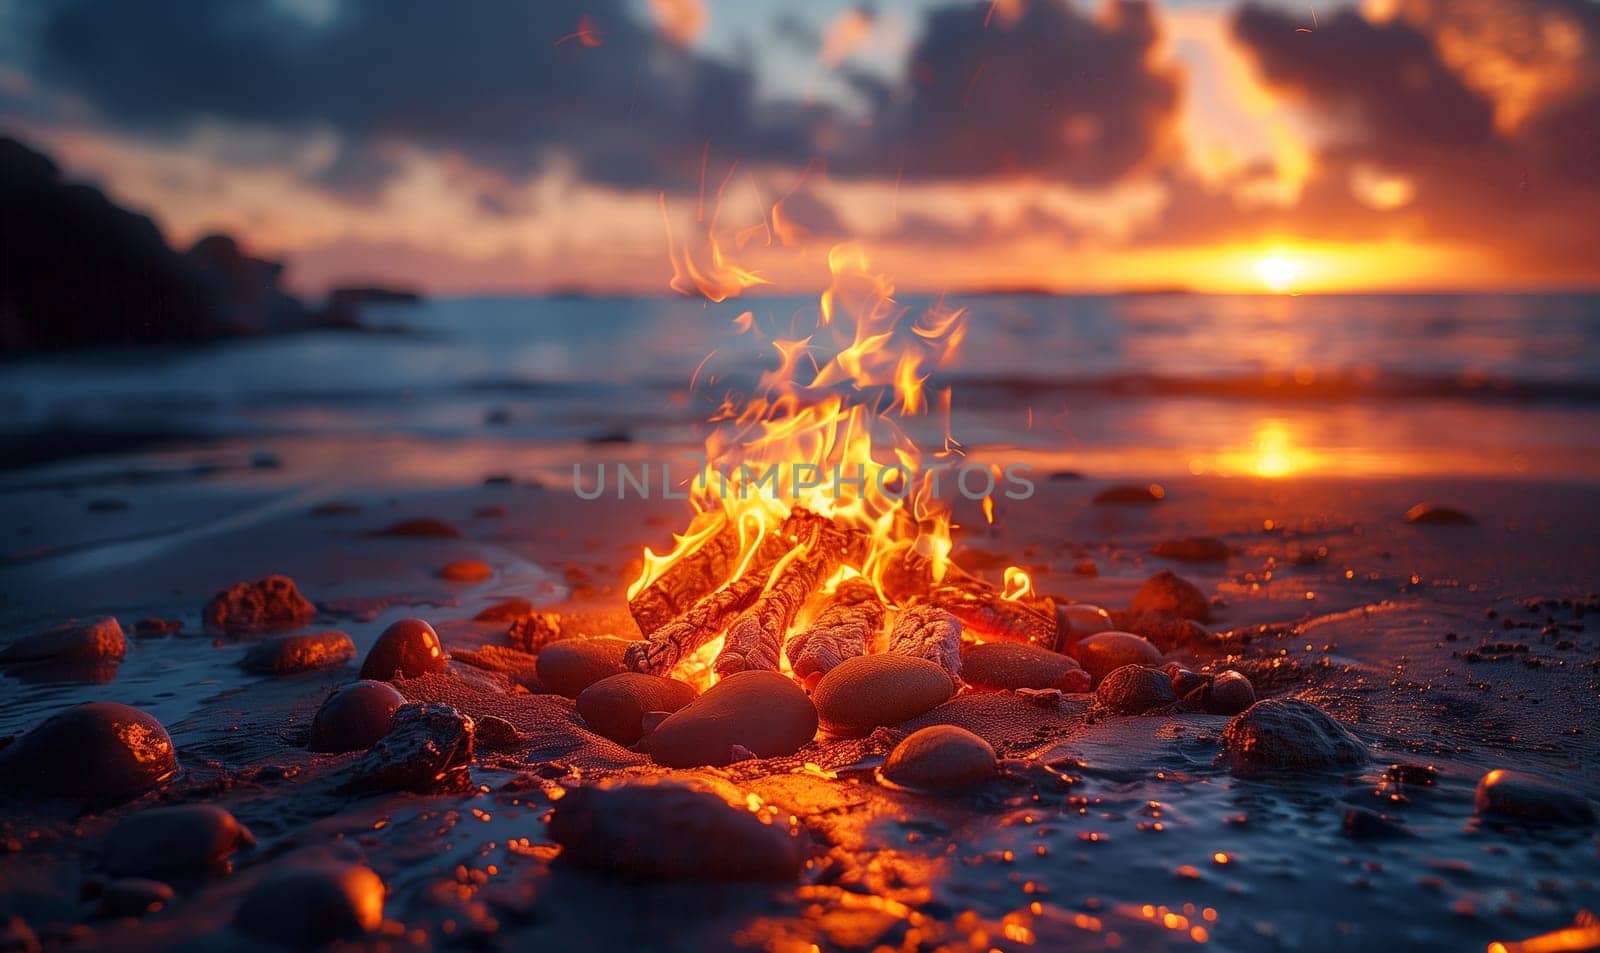 A fire on the shore against the backdrop of a colorful sunset. by Fischeron